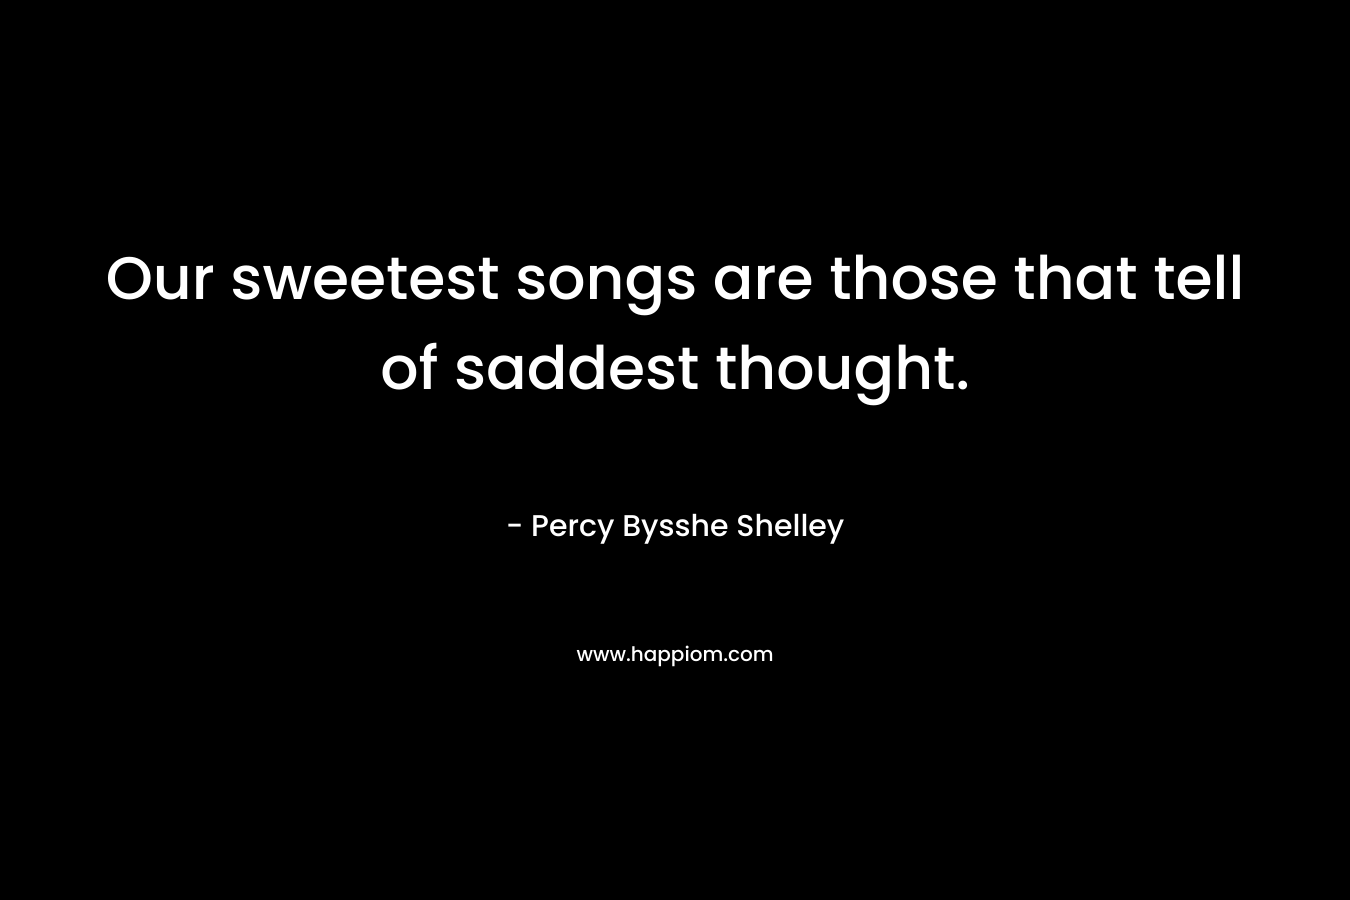 Our sweetest songs are those that tell of saddest thought. – Percy Bysshe Shelley